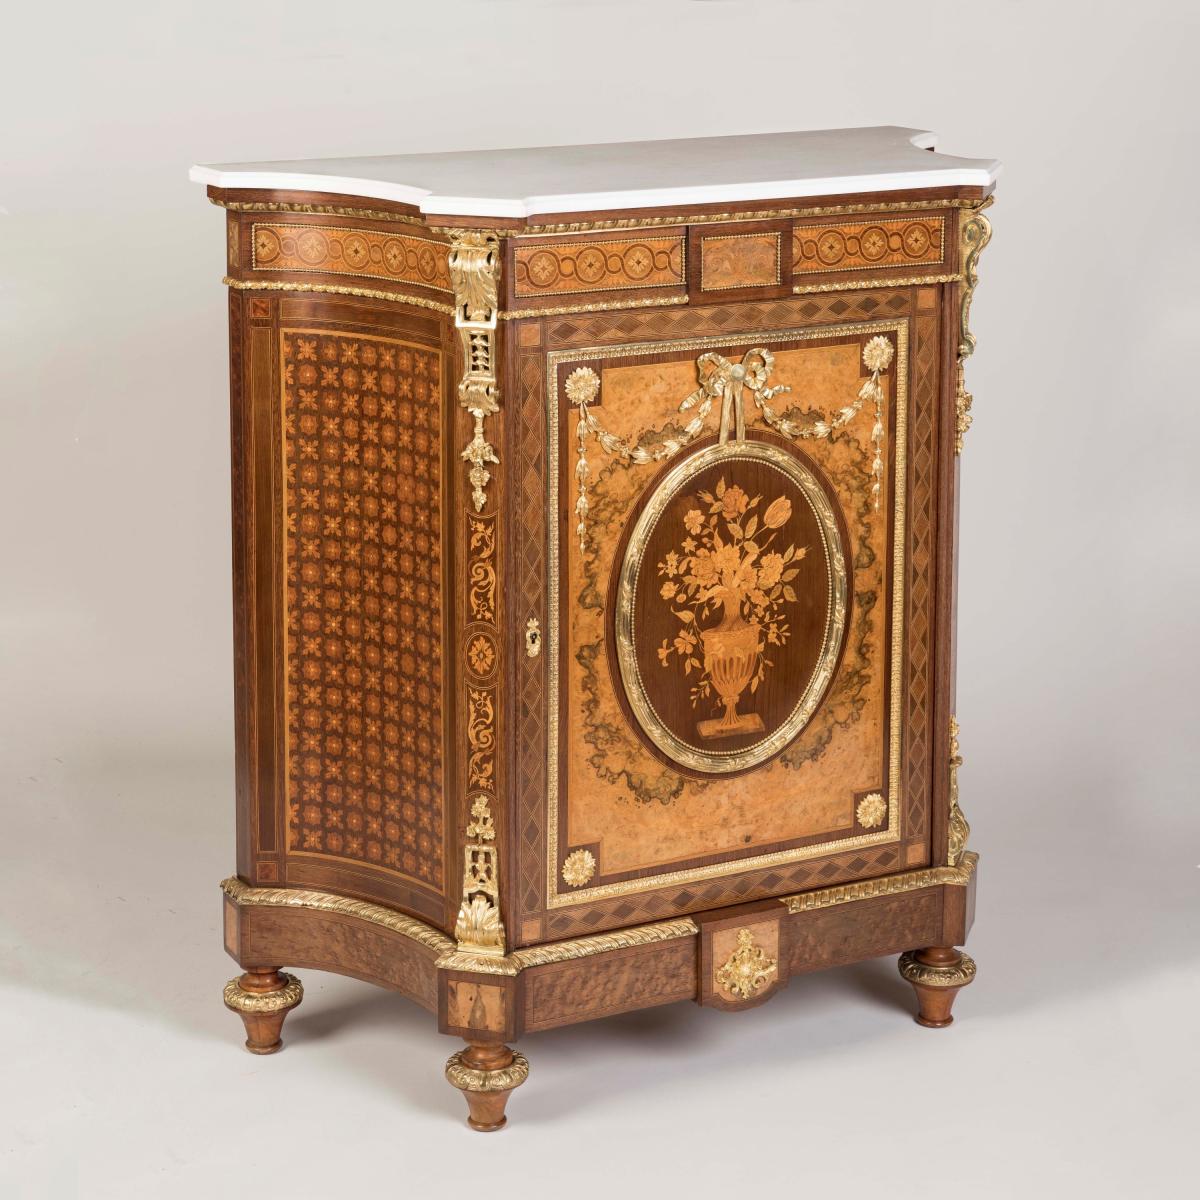 Louis XVI Style Marquetry Inlaid Meubles d'Appui